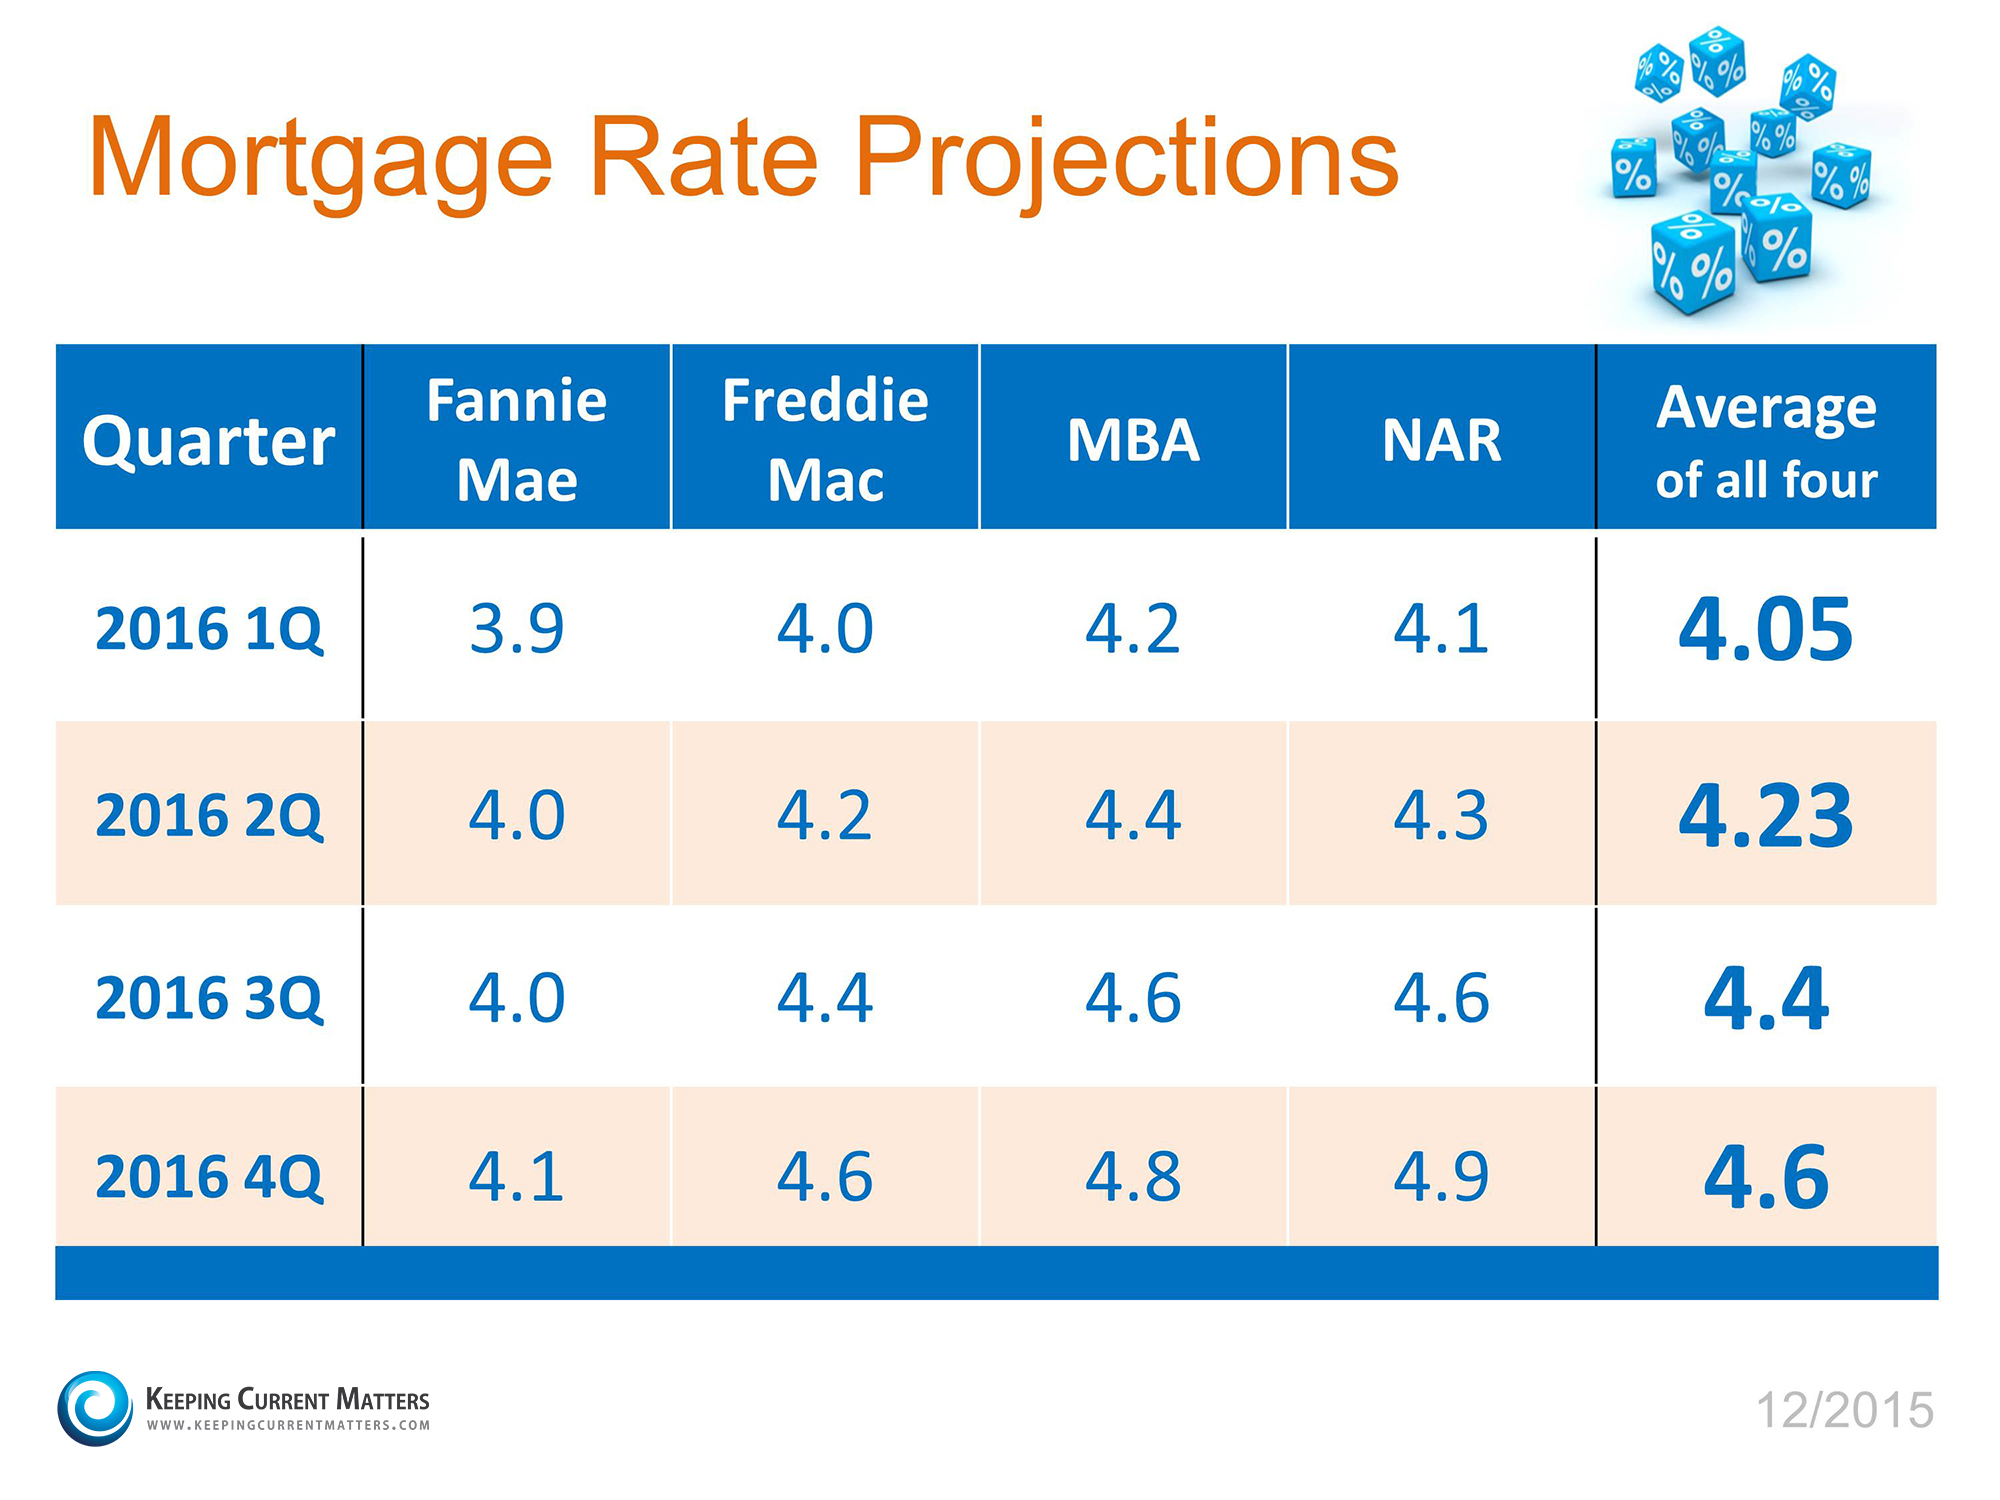 Prices & Mortgage Rates Going Up in 2016